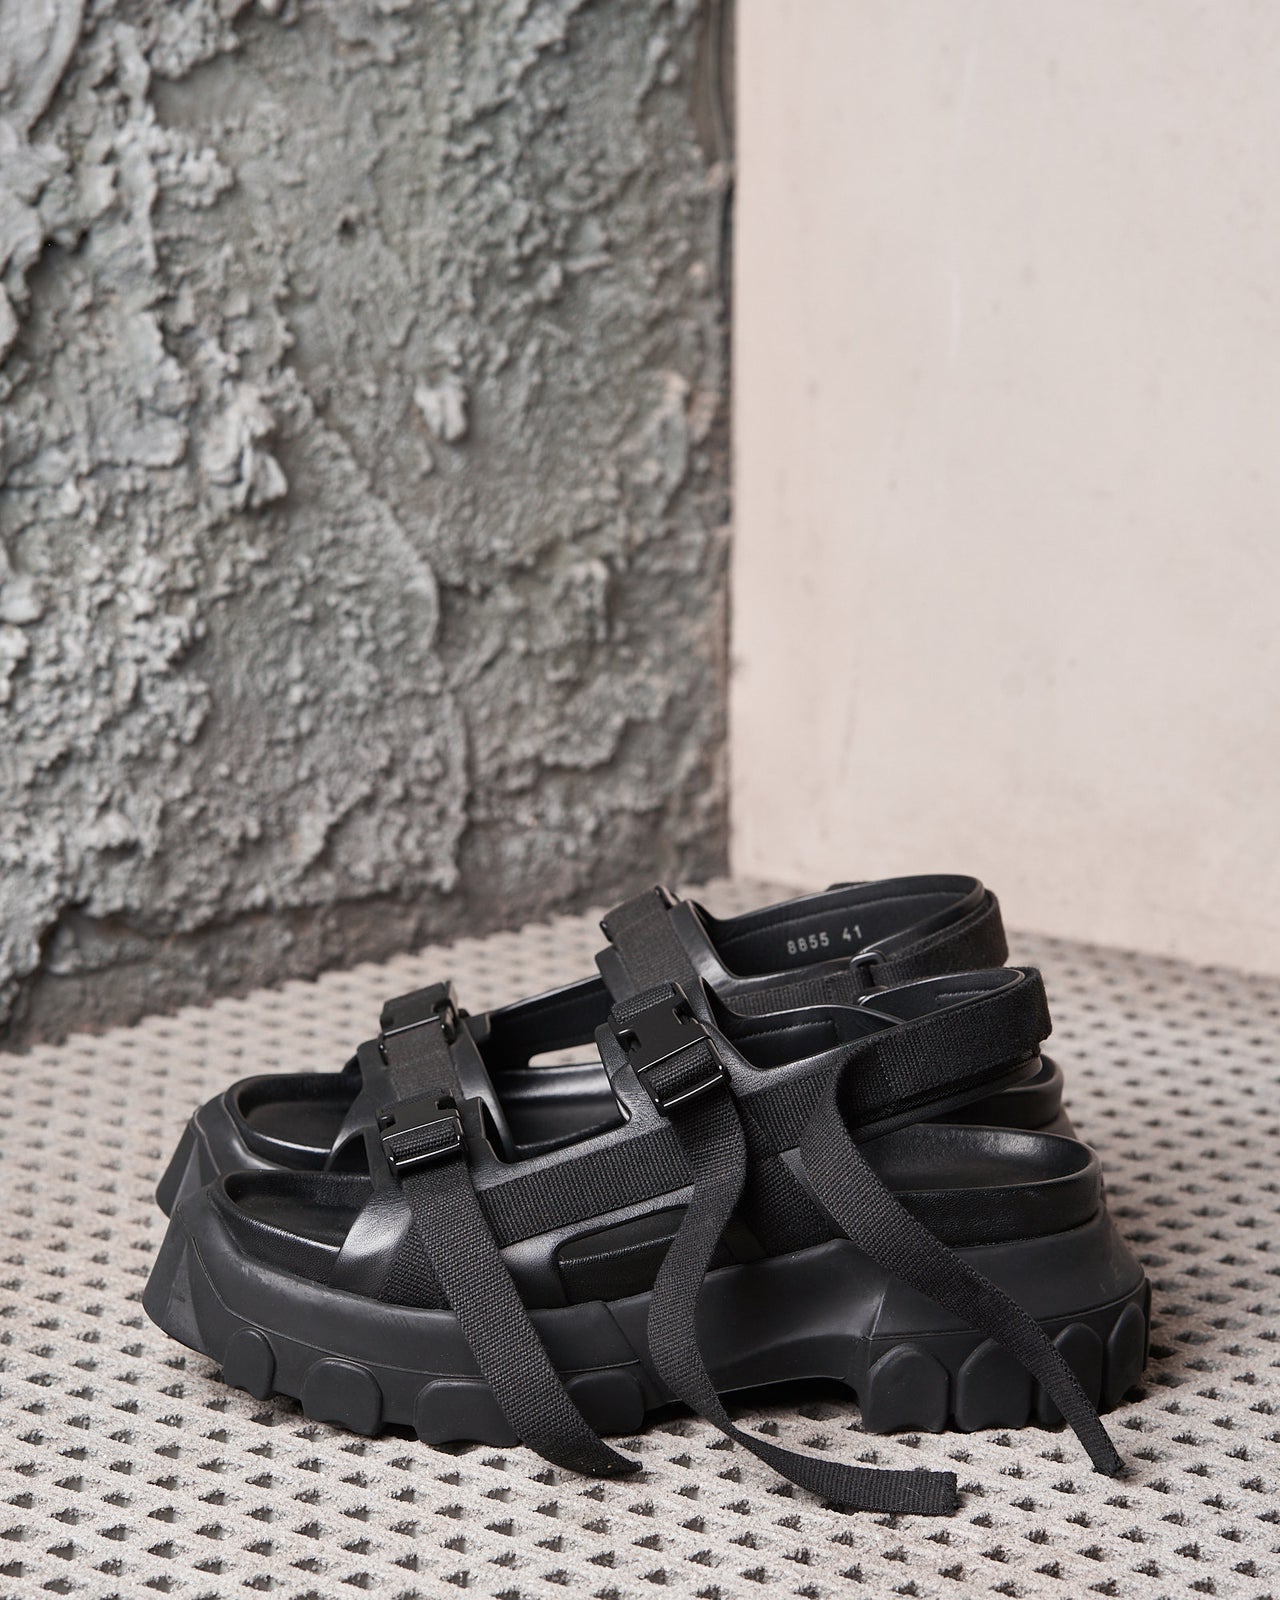 SS 2019 Babel tractor sandal